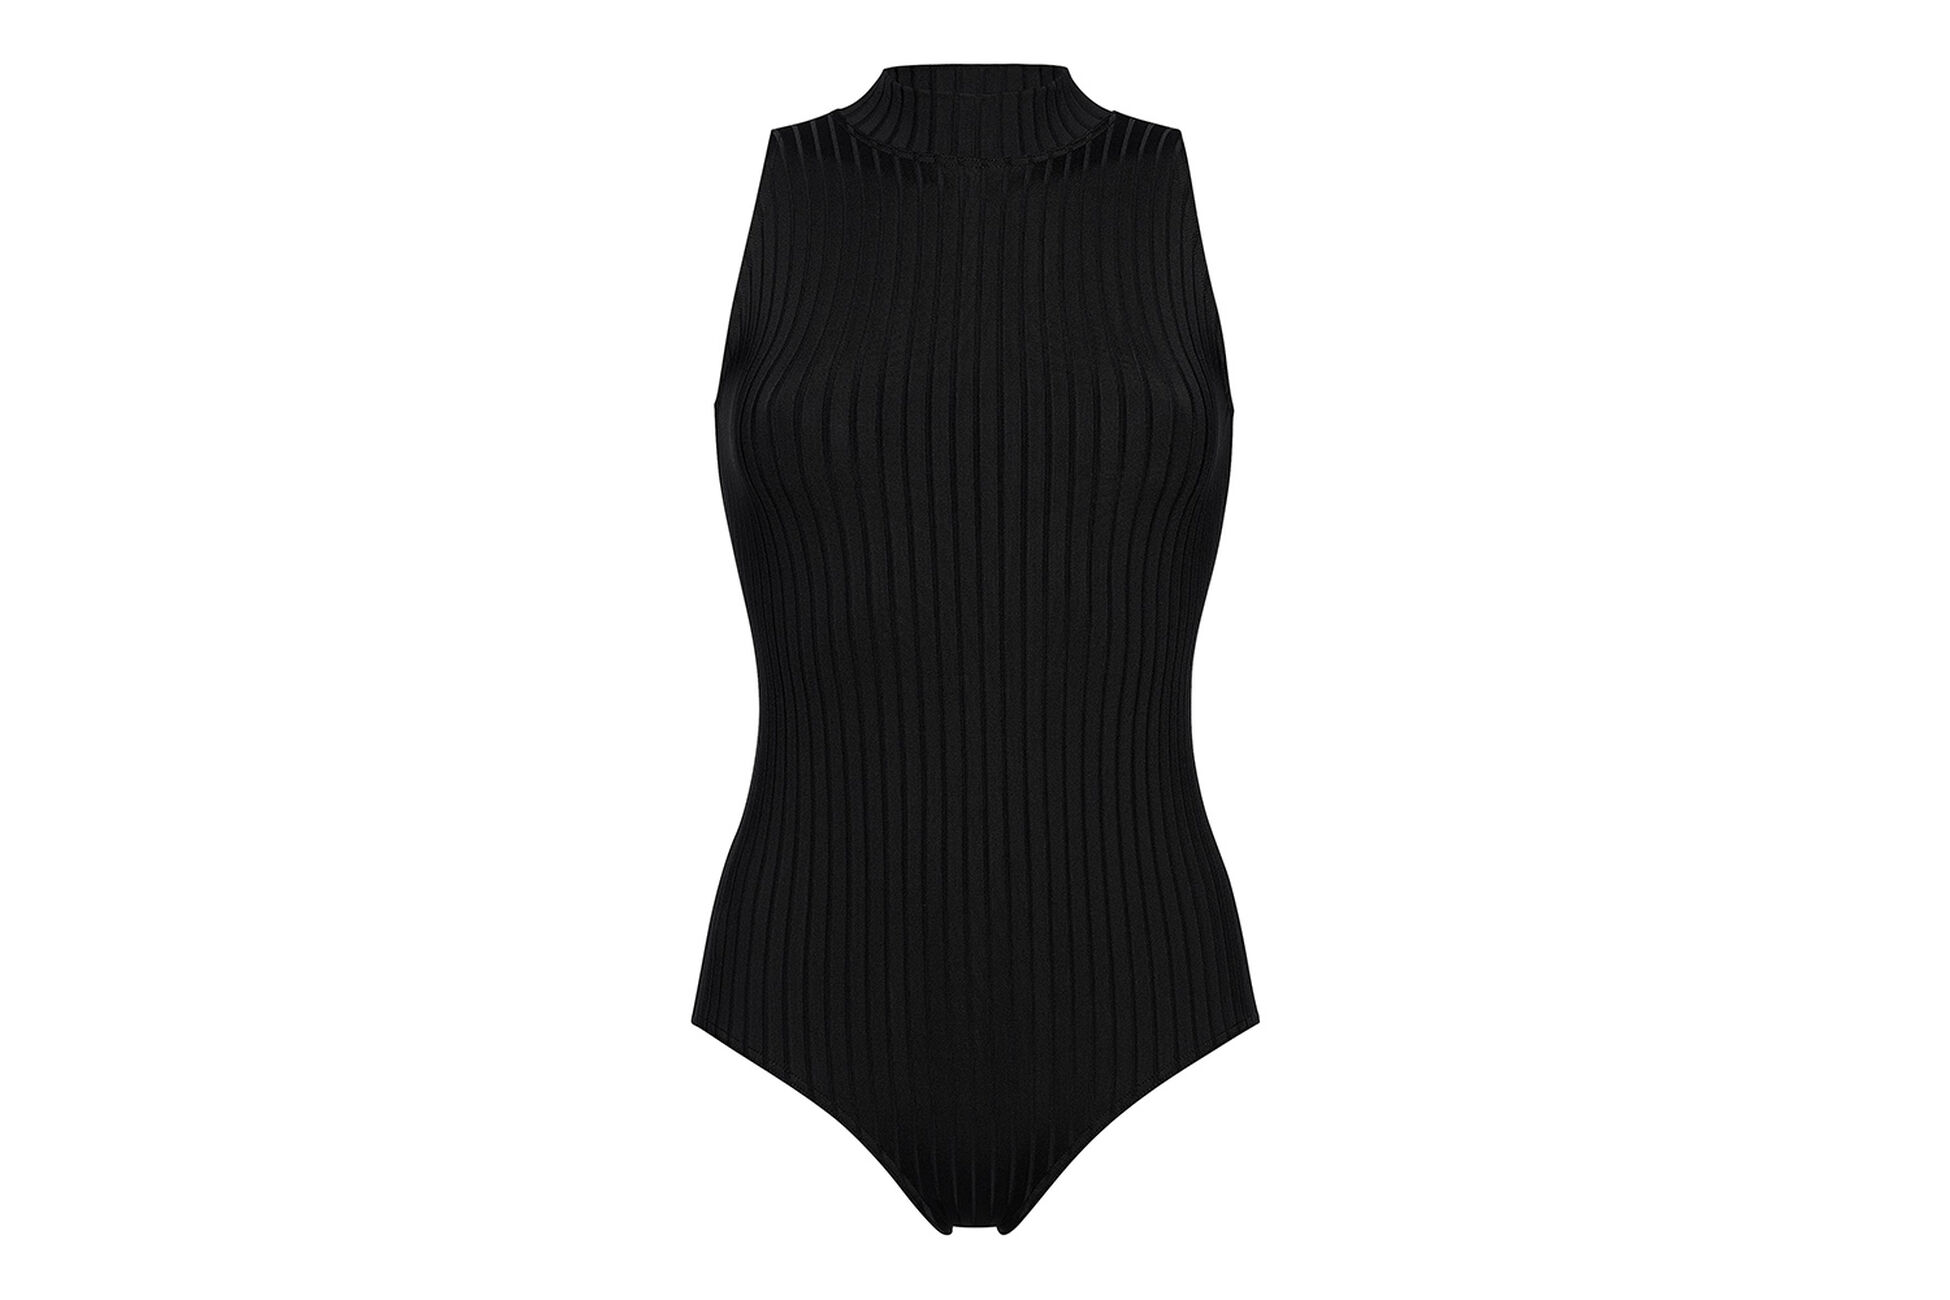 Mojito Sophisticated one-piece standard view NaN